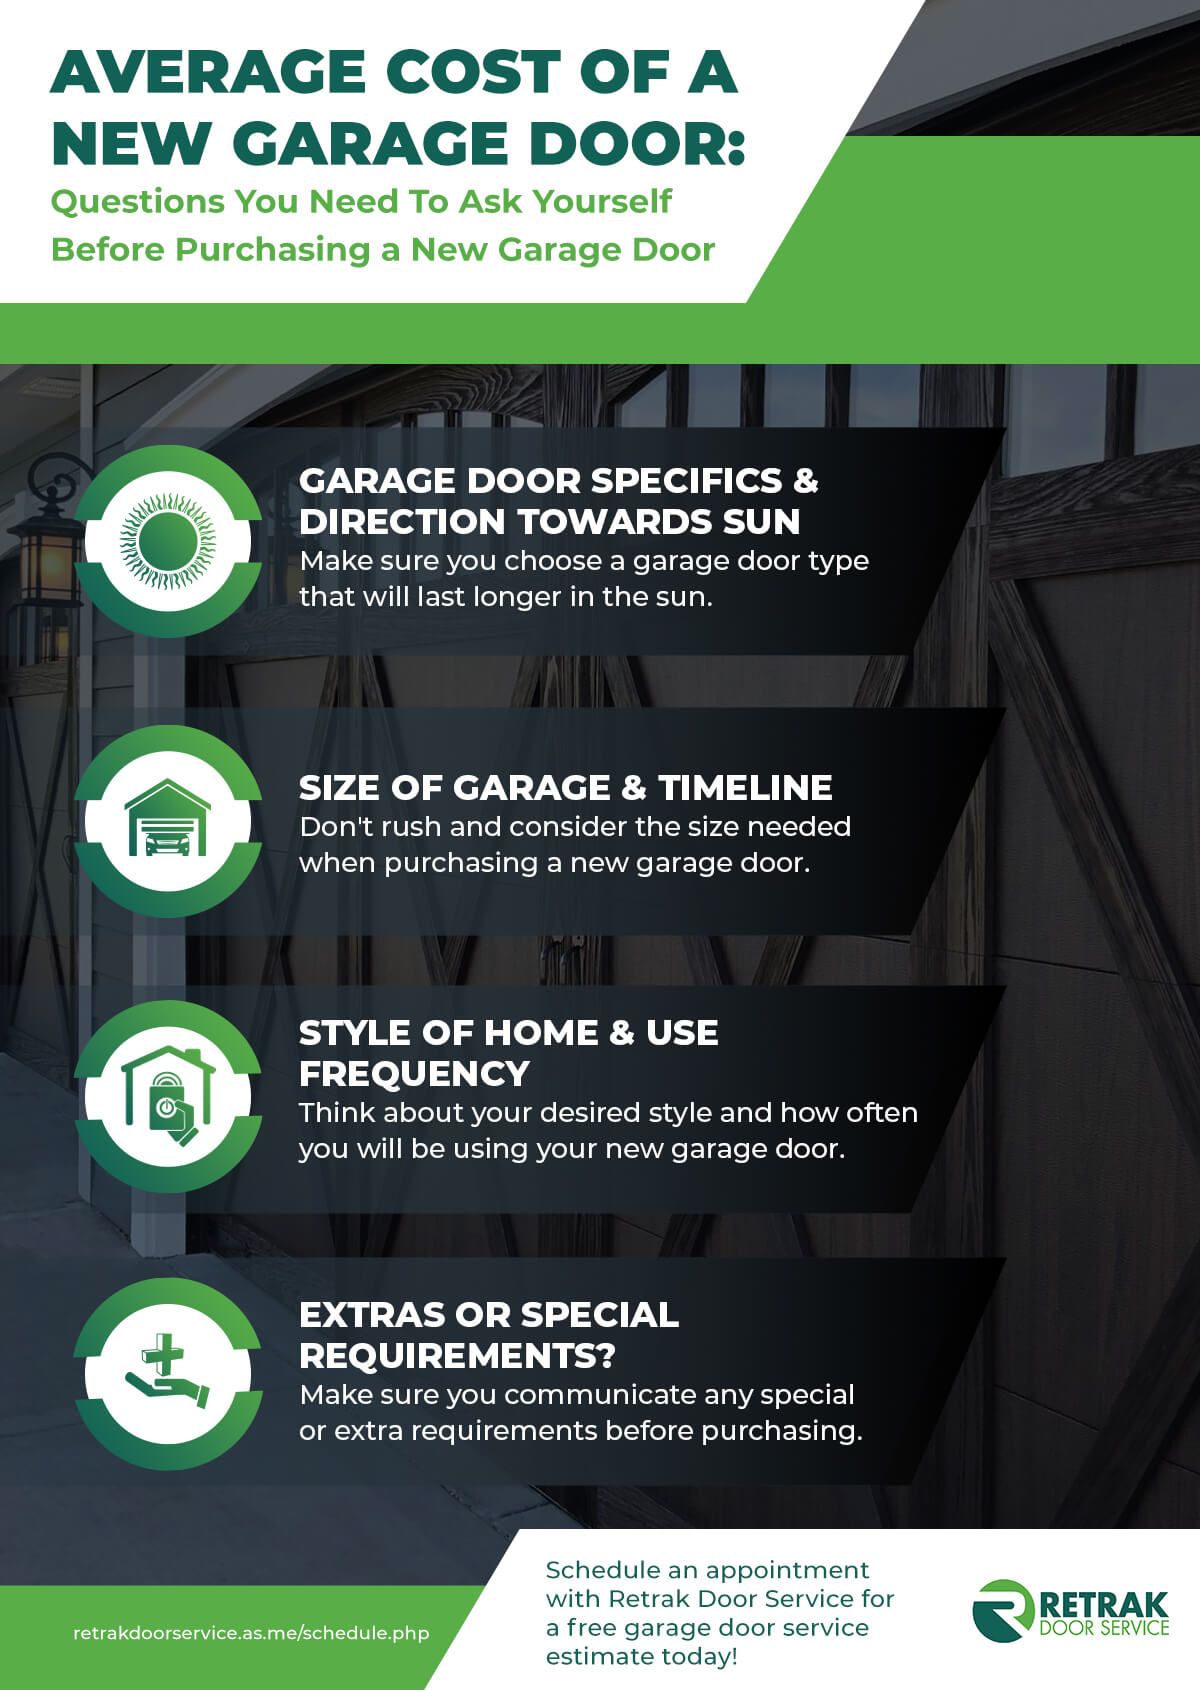 Average Cost Of a New Garage Door: Questions to Answer Before Purchasing a New Garage Door